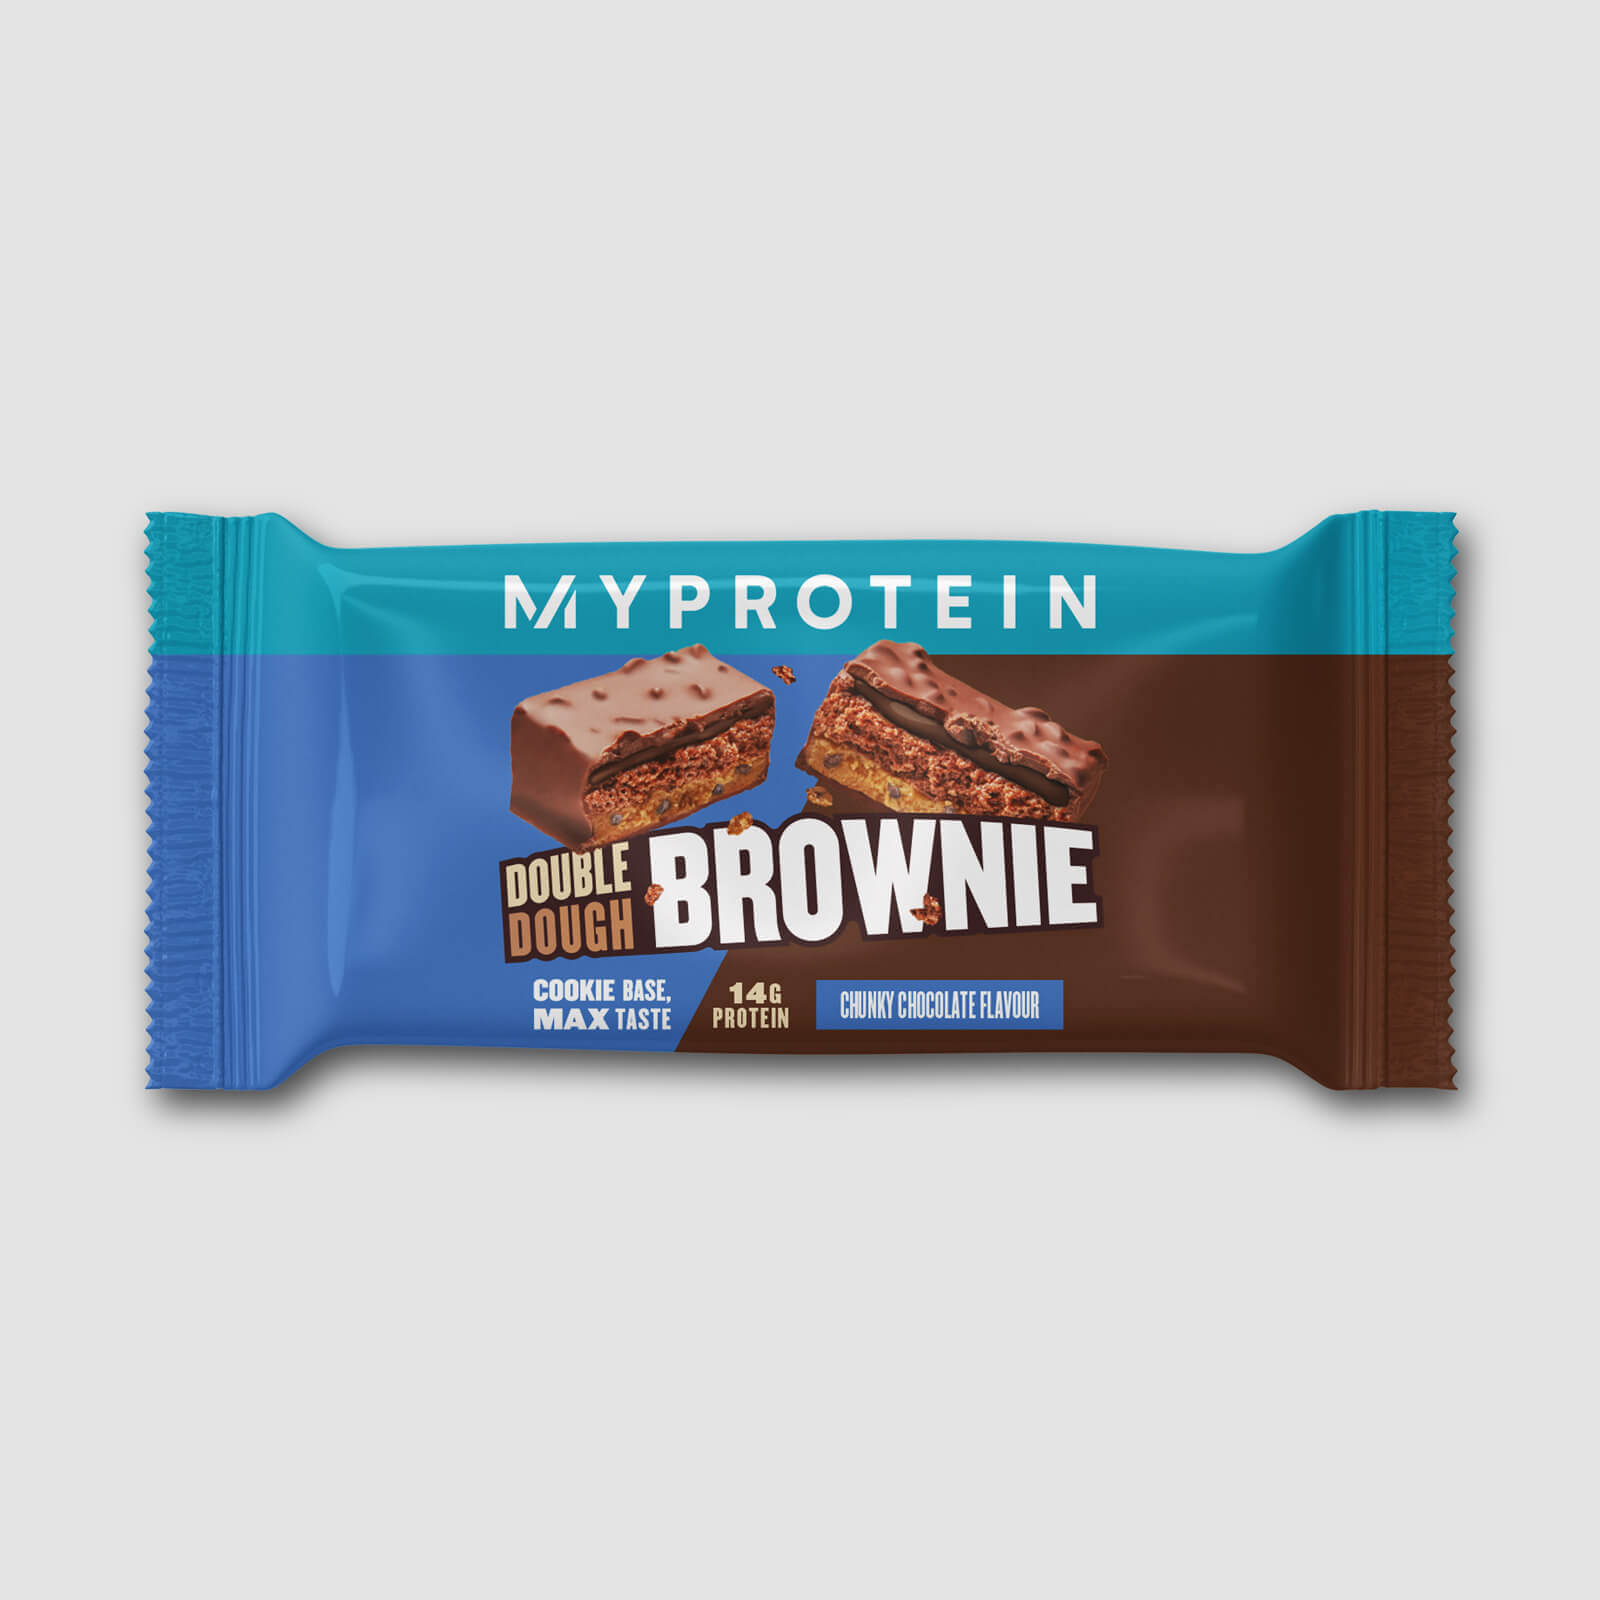 Myprotein Protein Double Dough Brownie (Sample) (IND) - 60g - Chunky Chocolate